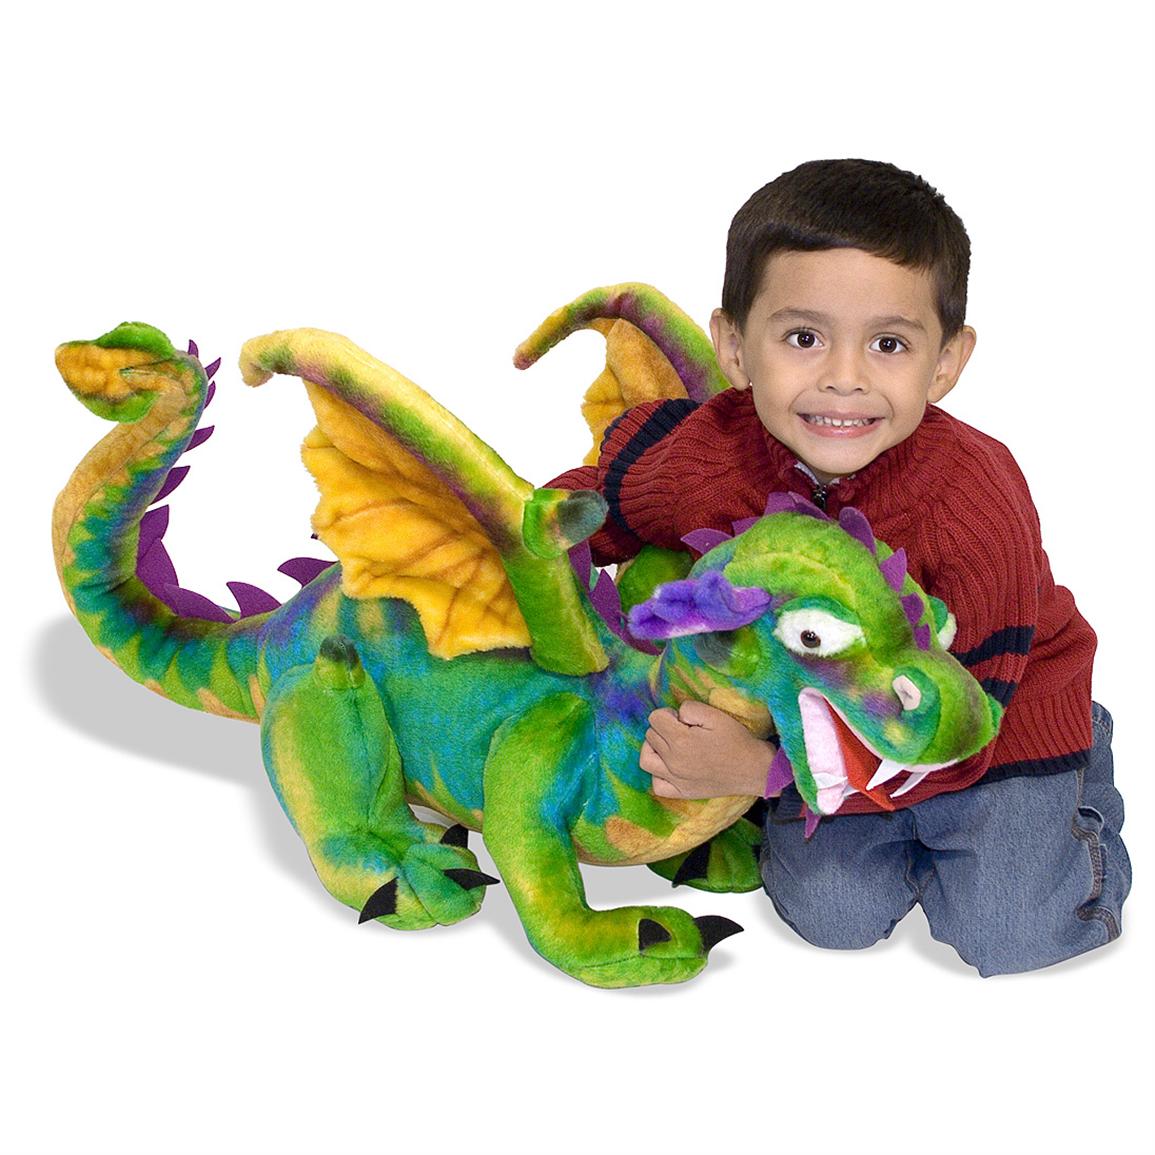 Melissa And Doug® Plush Dragon 219248 Toys At Sportsmans Guide